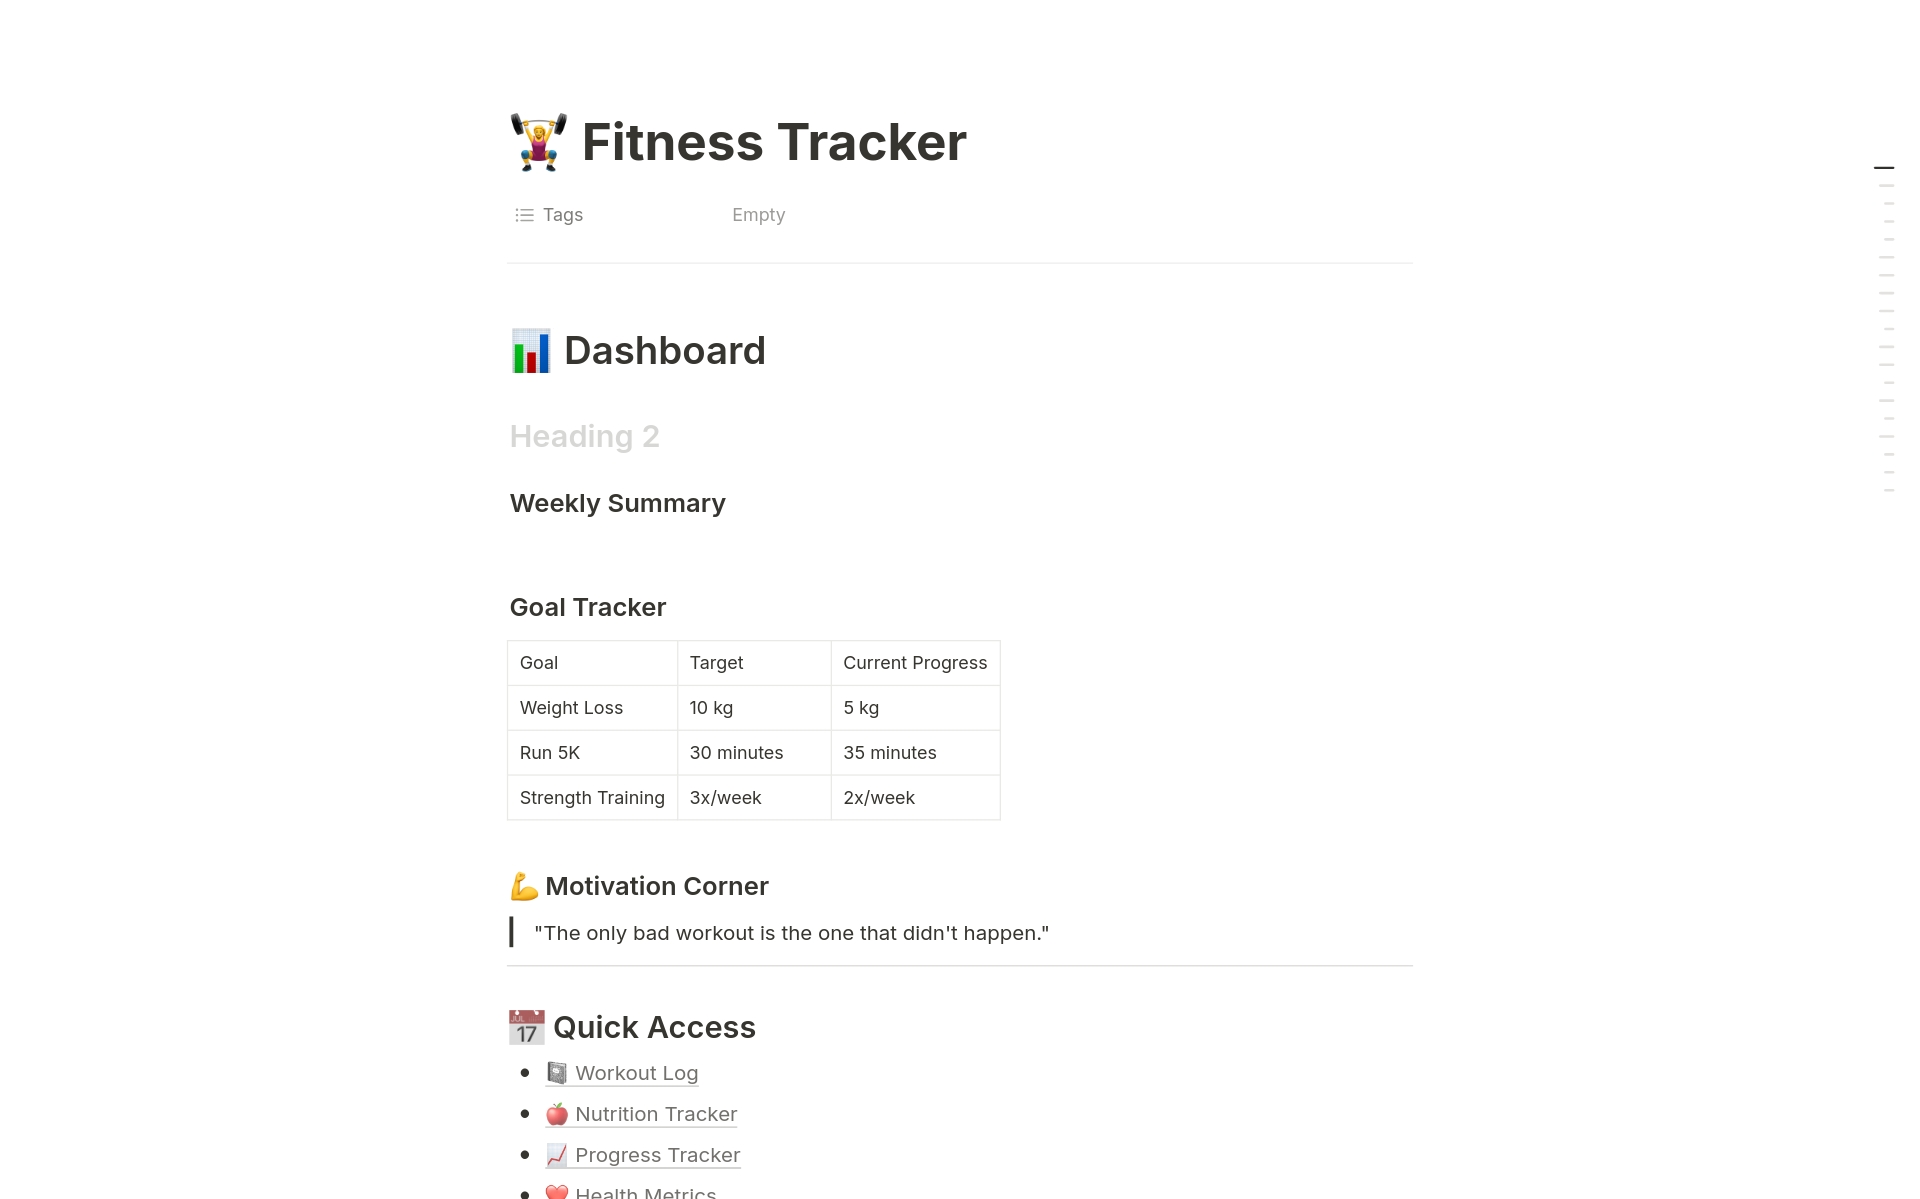 🏋️‍♀️ Comprehensive Fitness Tracker Template
Transform your health and fitness journey with this all-in-one Notion template. Designed for both beginners and fitness enthusiasts, this tracker helps you set goals, monitor progress, and stay motivated.